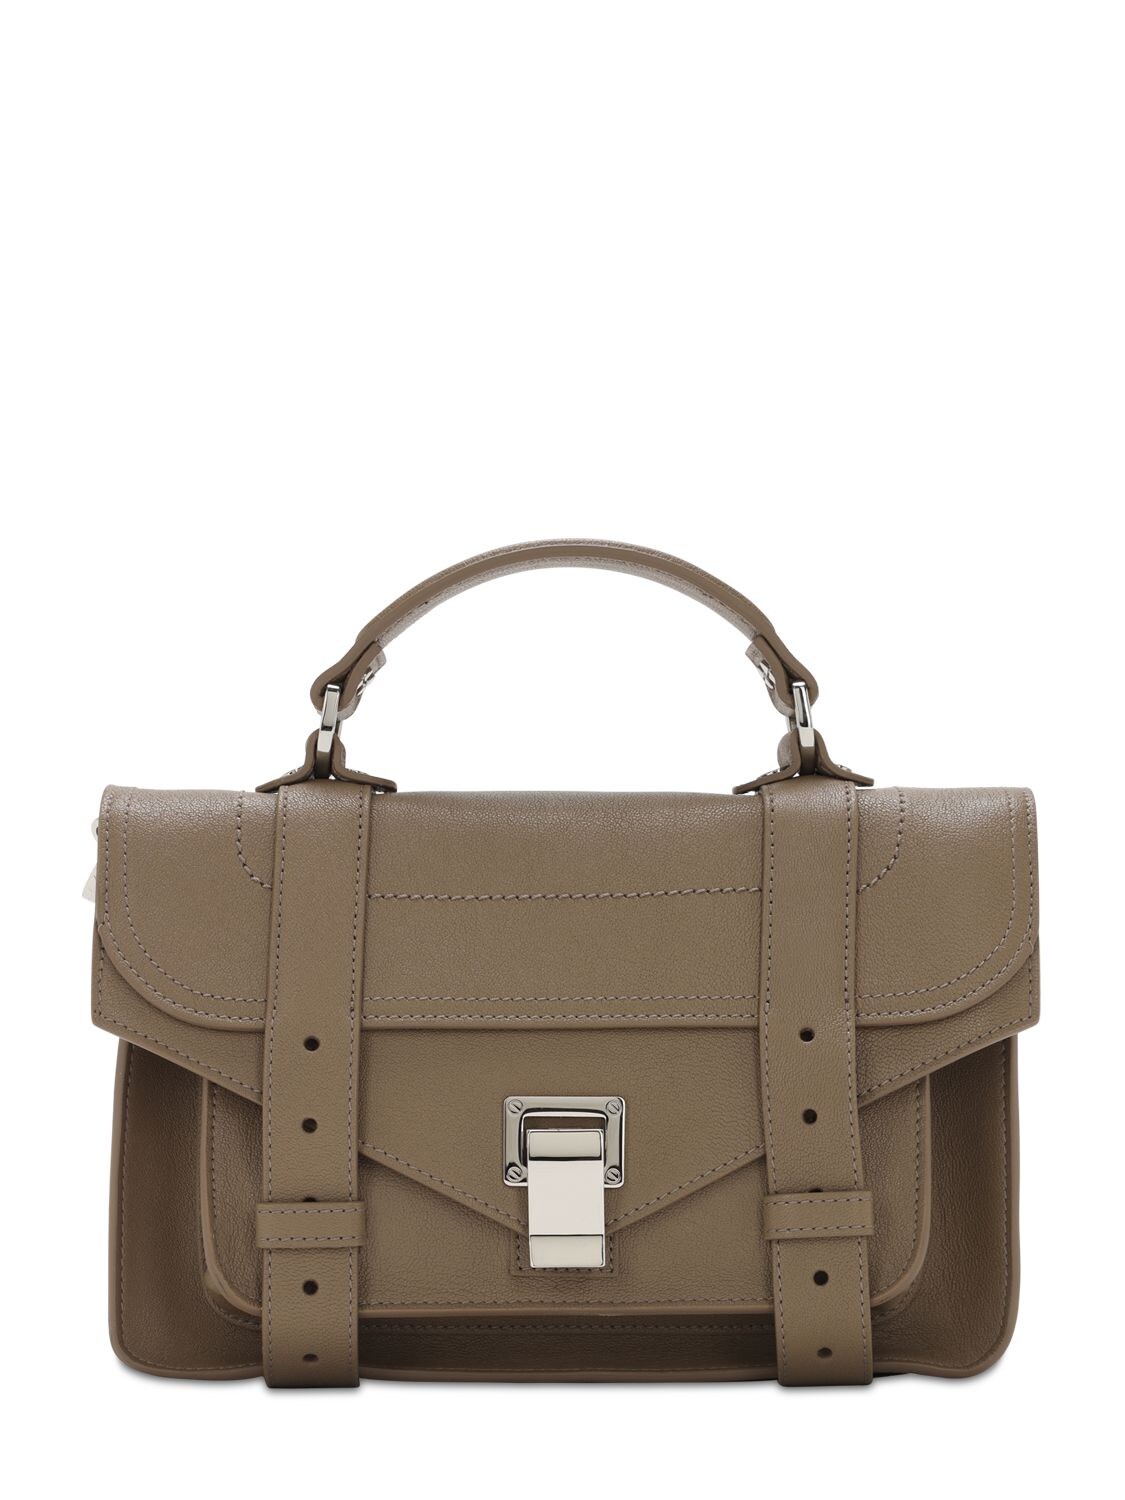 Proenza Schouler Ps1 Tiny Lux Leather Top Handle Bag In Light Taupe ...